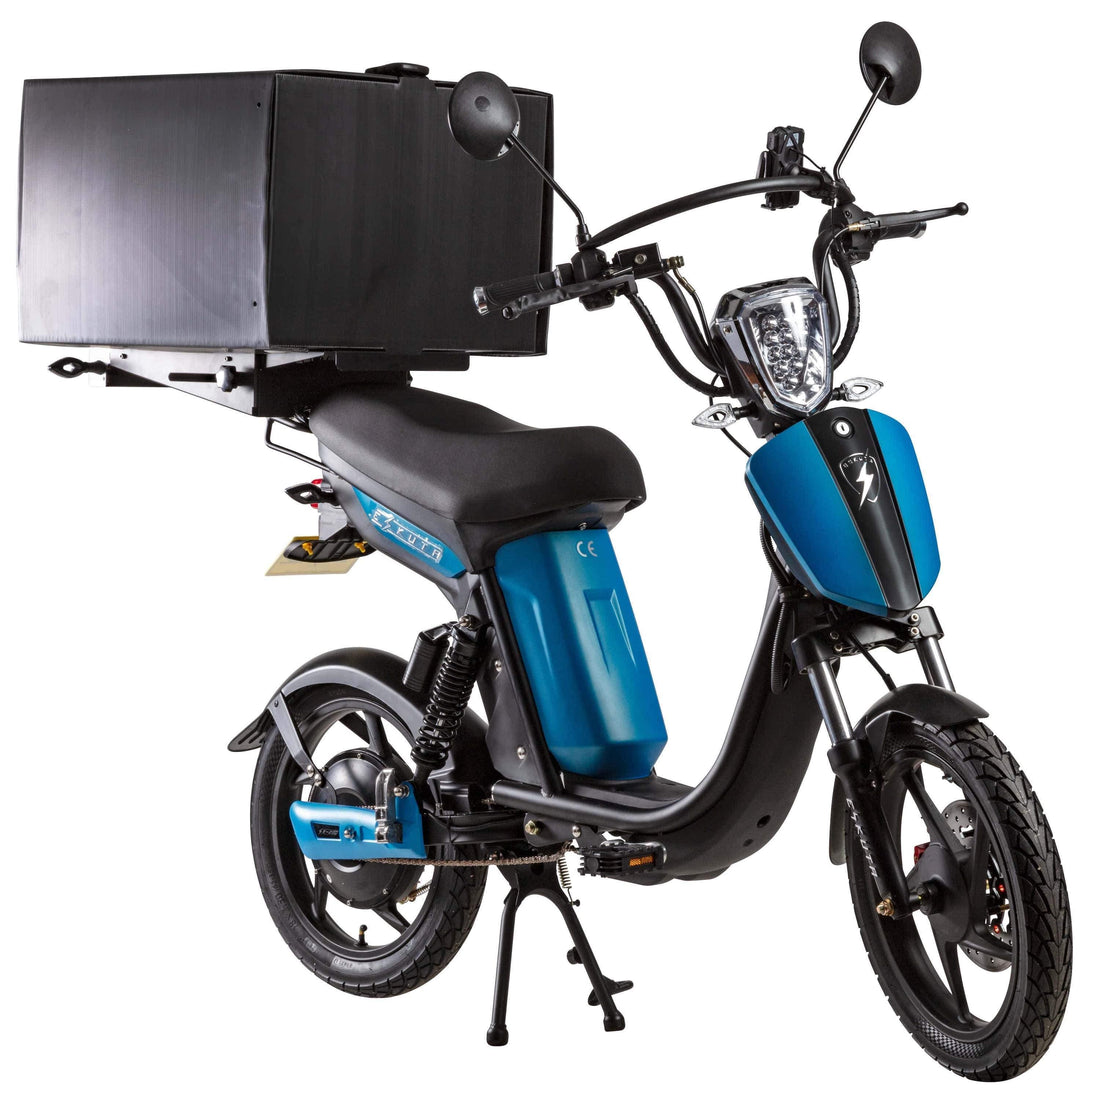 Our SX-250d delivery bike in Hermes eco delivery service project! - Eskuta 